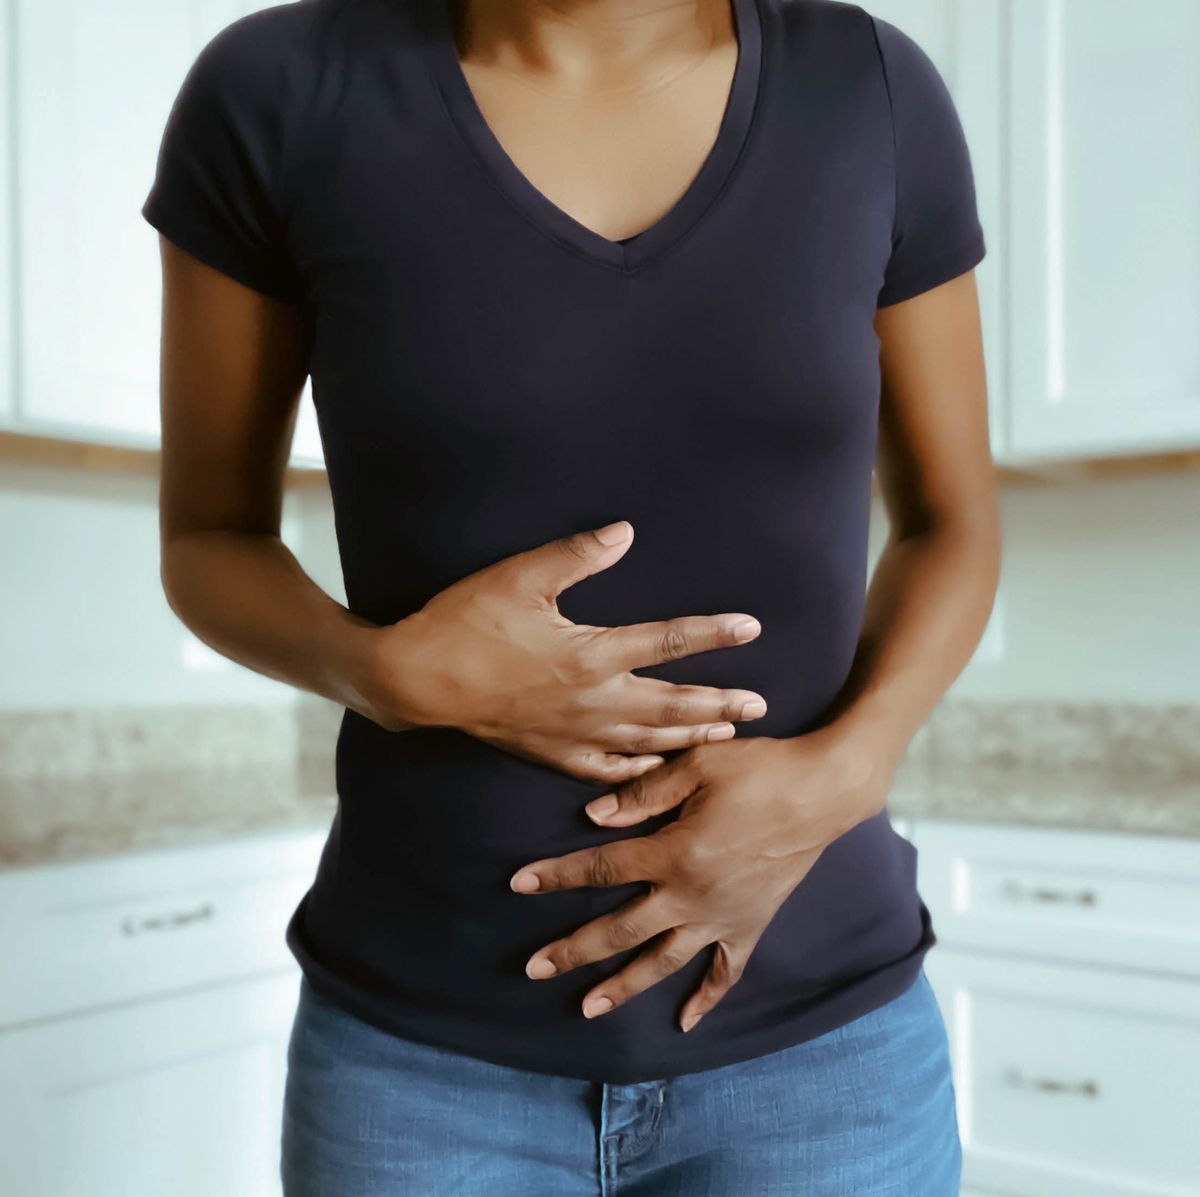 Bloat or Pregnant? Here's How to Tell